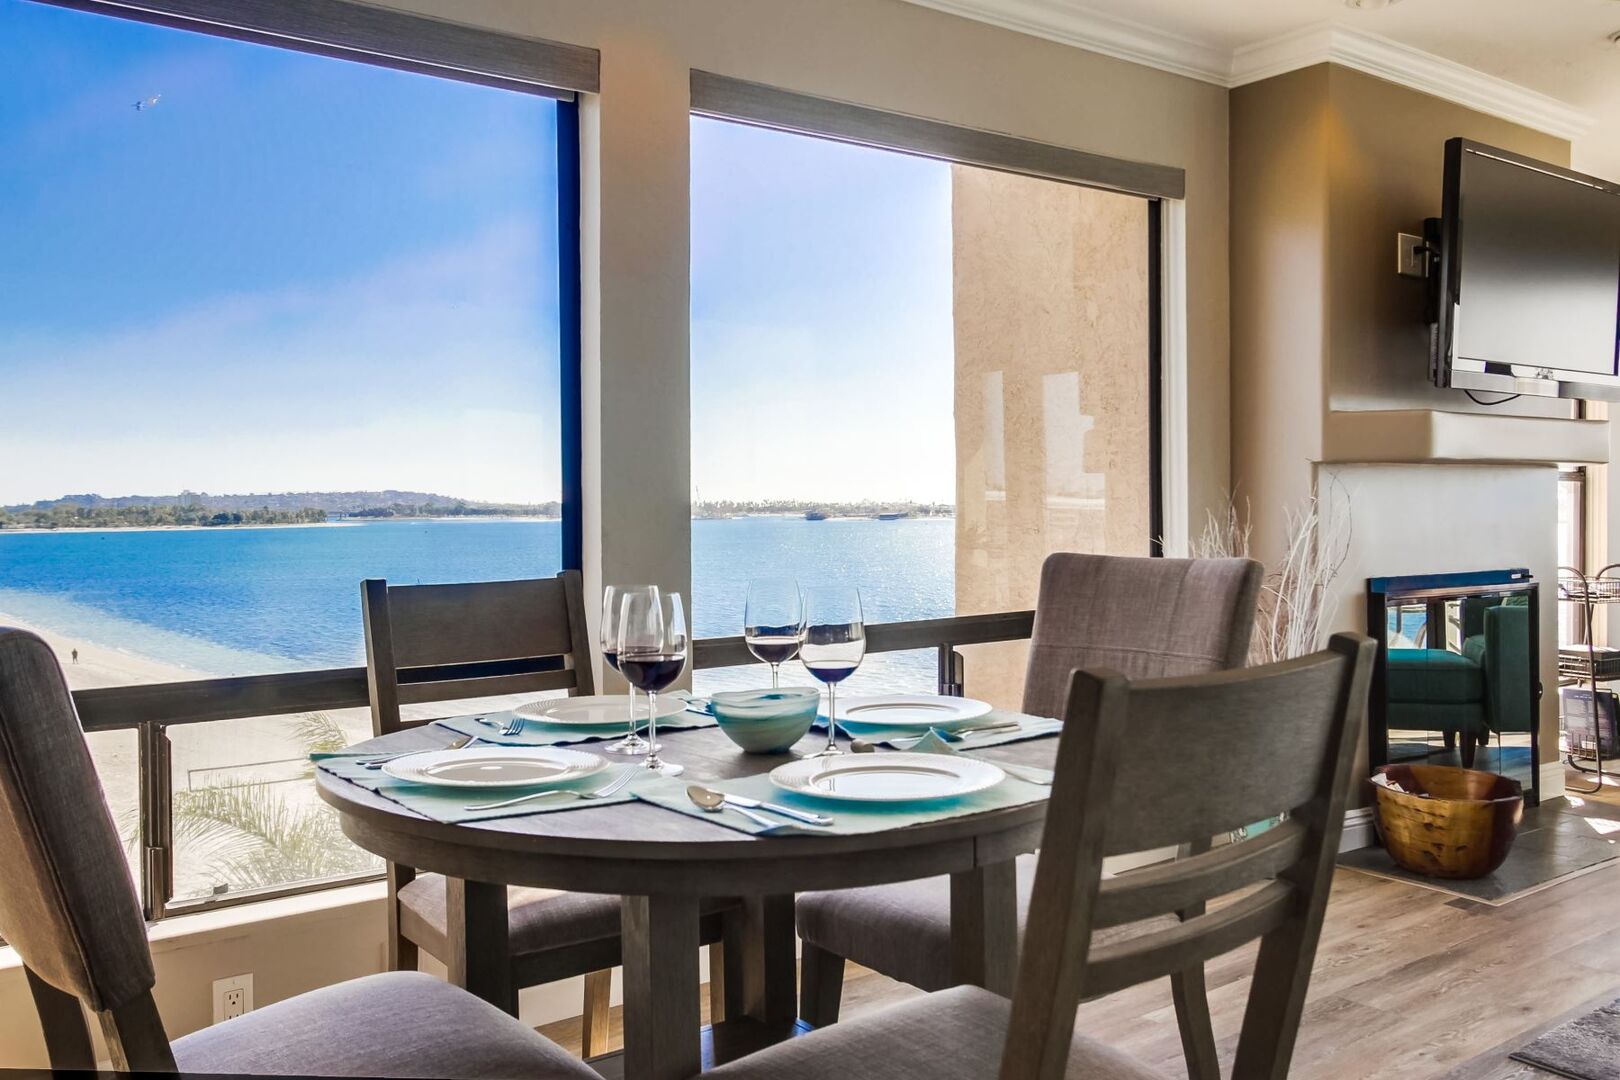 Dining room with seating for 4 with corner bay views!